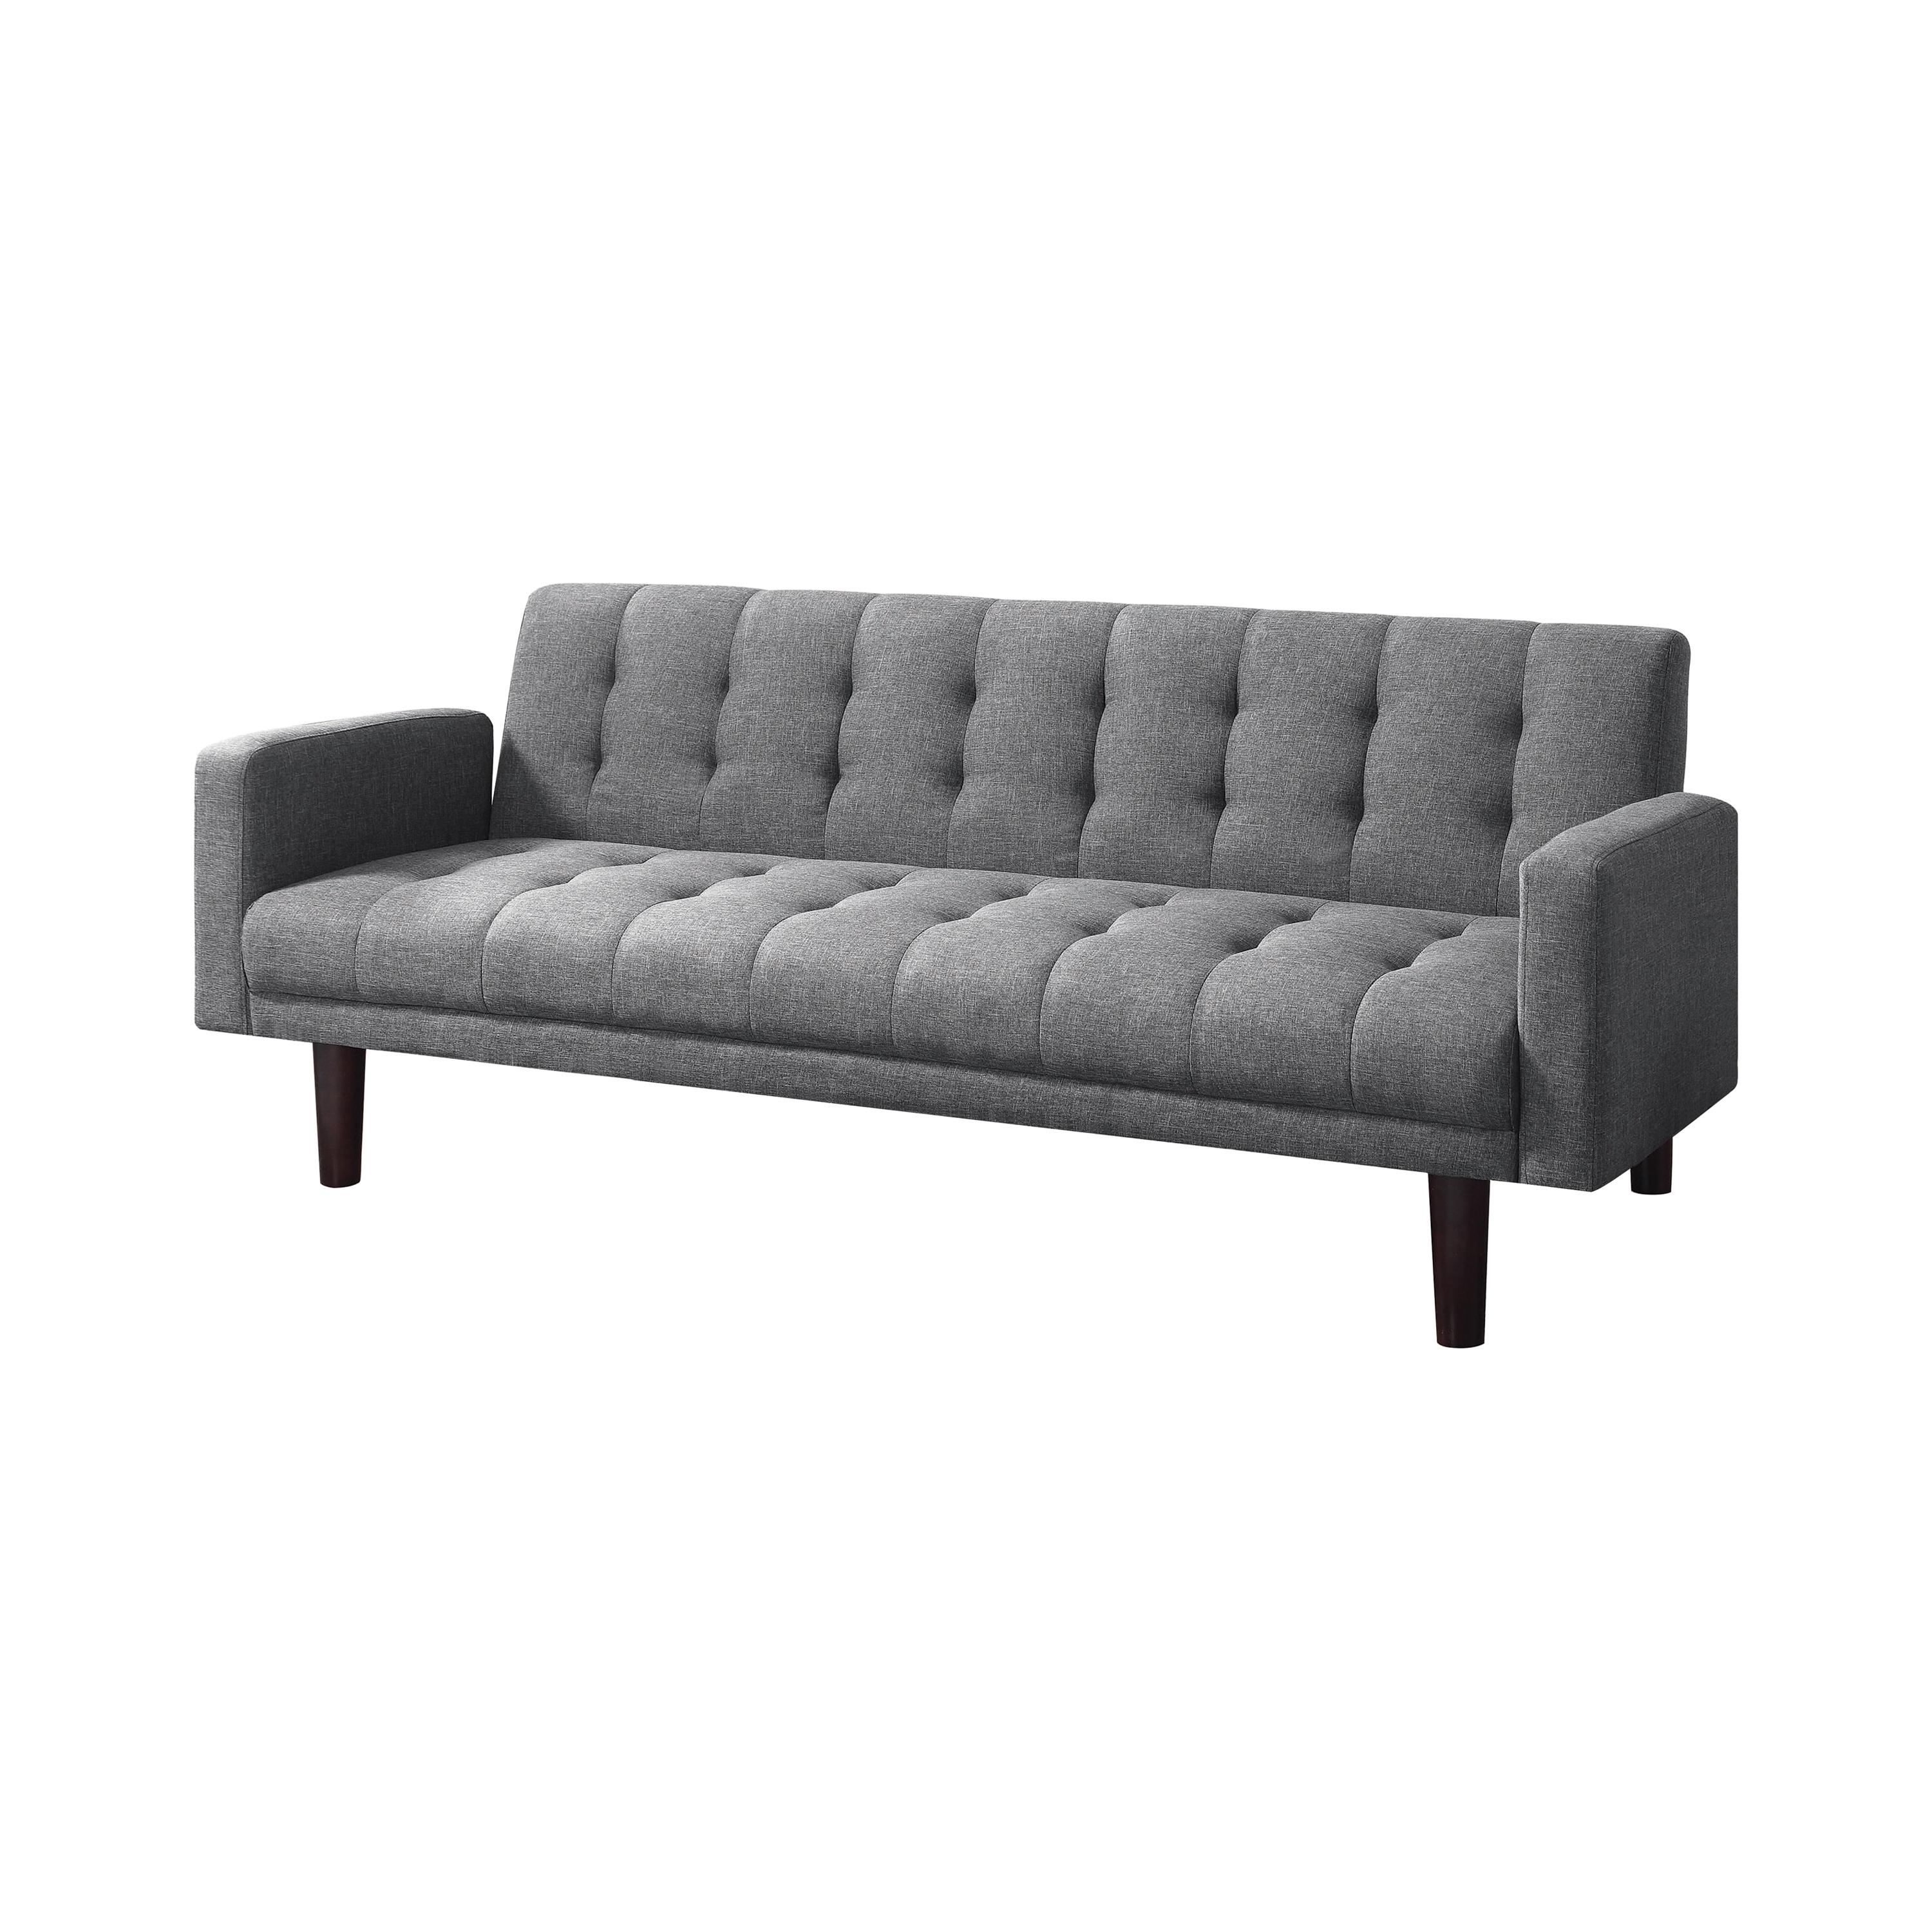 Coaster 360150 Sommer Sofa bed